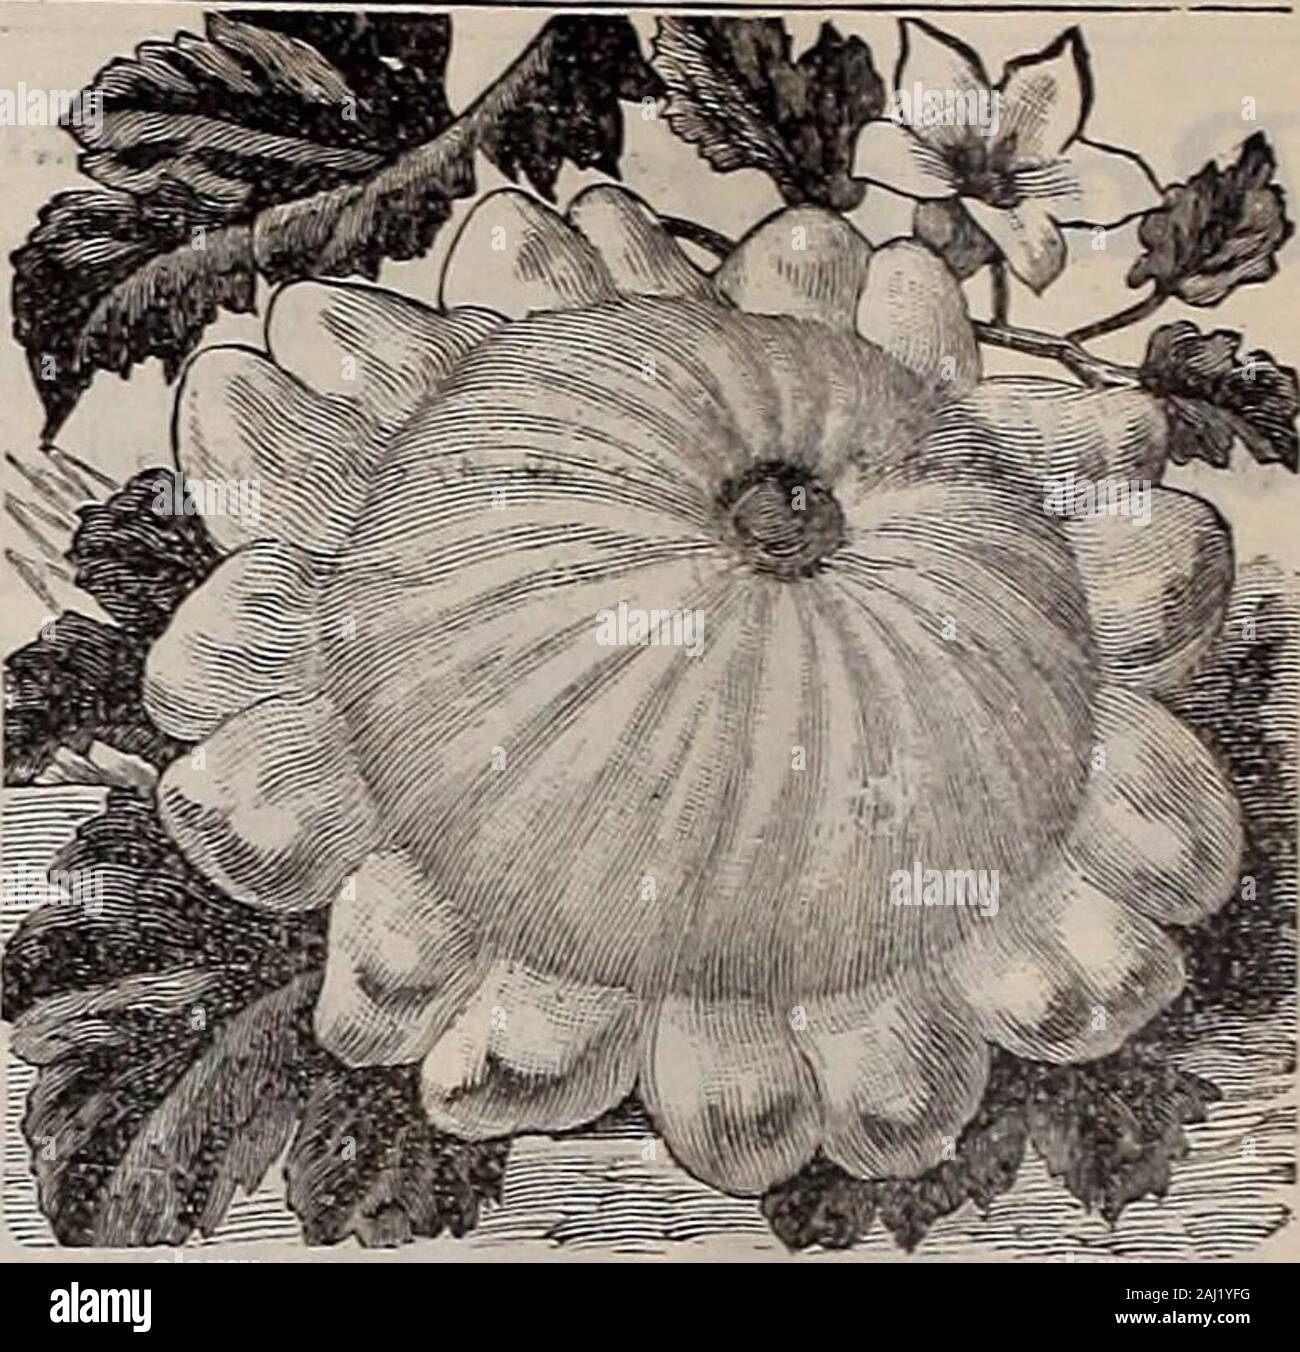 Livingston's seeds : 1902 'true blue' annual . liV White Bash ScaUop ScLoash. ilVINGSTON S PIE SQUASH,  J Called oy Some Seedsmen Pie Pumpkin. It is also claimed by some to be the same as .Winter Luxury Pumpkin; this is incorrect, Liv- stons Pie Squash being more smooth (showing  BO ribs whatever), and of more uniform growth in type and crop. We have alwa ys called it aS Squash, inasmuch as the family from whom wefirst obtained om- seed had always been in the  Nj habit of speaking of it as such. Whether SquashX, or Pumpkin, one thing is sure, it is far in ad- VANCE OF any PUMPKIN IN QUALI Stock Photo